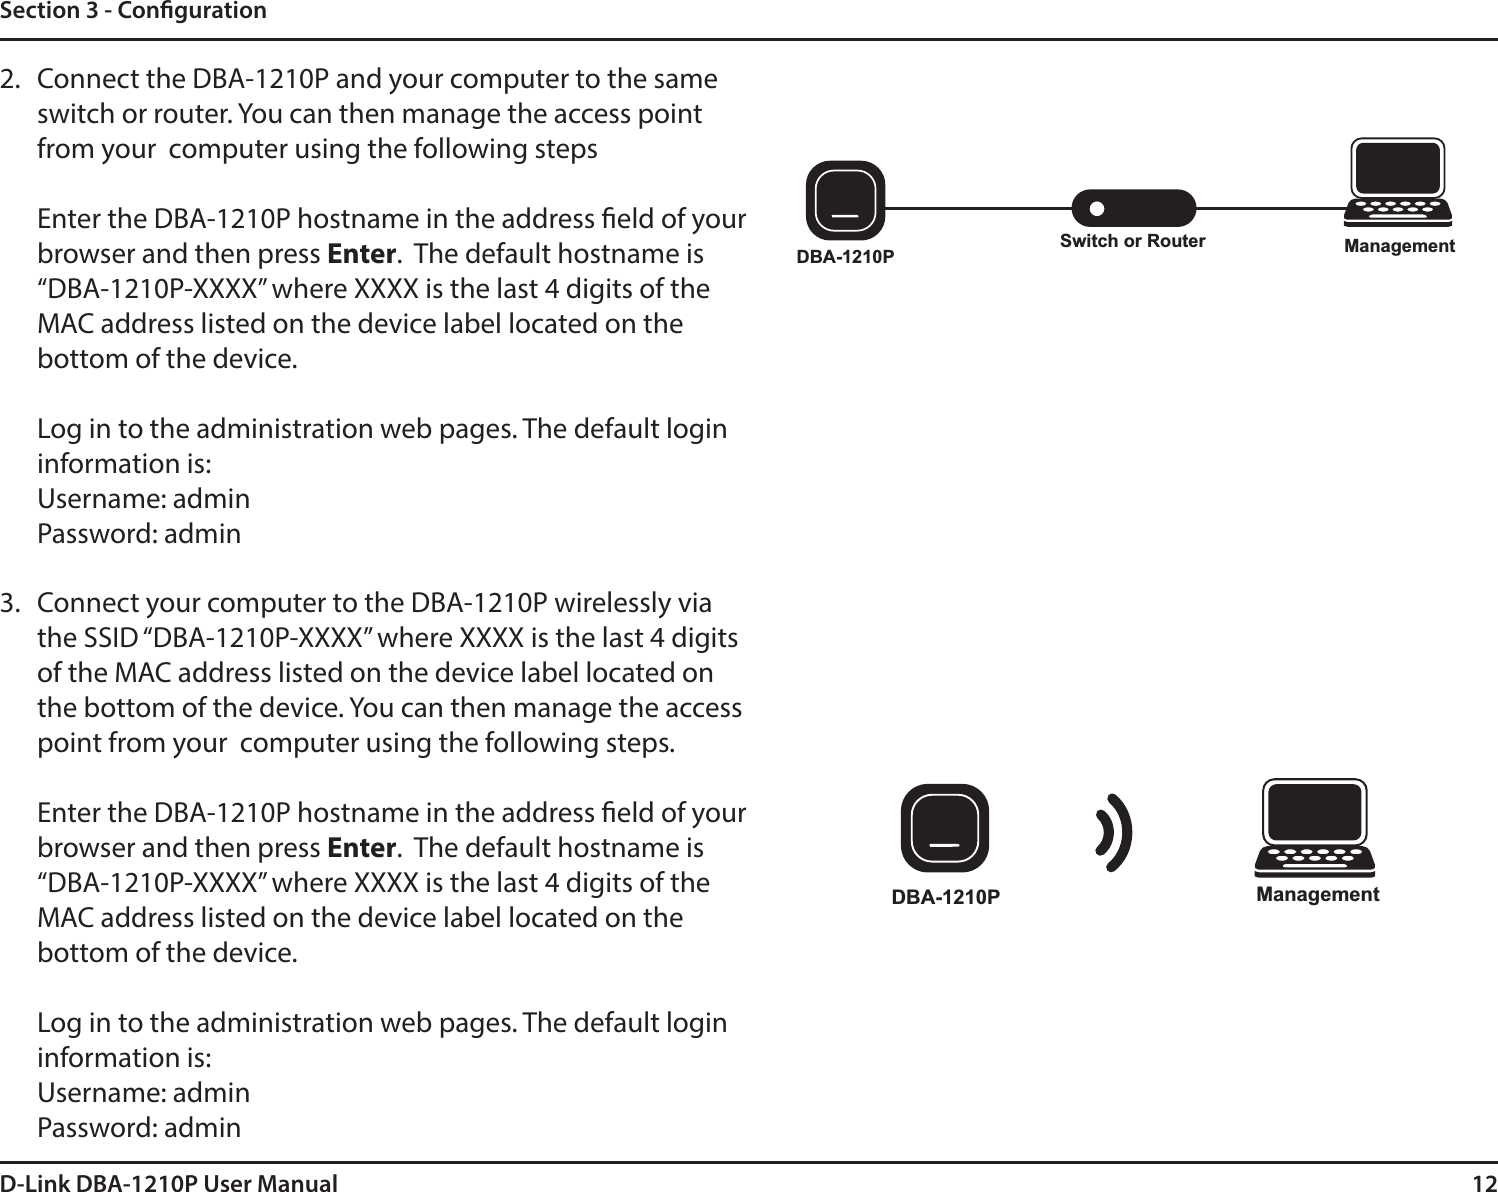 12D-Link DBA-1210P User ManualSection 3 - Conguration2. Connect the DBA-1210P and your computer to the same switch or router. You can then manage the access point from your  computer using the following stepsEnter the DBA-1210P hostname in the address eld of your browser and then press Enter.  The default hostname is “DBA-1210P-XXXX” where XXXX is the last 4 digits of the MAC address listed on the device label located on the bottom of the device.Log in to the administration web pages. The default login information is:Username: adminPassword: admin3. Connect your computer to the DBA-1210P wirelessly via the SSID “DBA-1210P-XXXX” where XXXX is the last 4 digits of the MAC address listed on the device label located on the bottom of the device. You can then manage the access point from your  computer using the following steps.Enter the DBA-1210P hostname in the address eld of your browser and then press Enter.  The default hostname is “DBA-1210P-XXXX” where XXXX is the last 4 digits of the MAC address listed on the device label located on the bottom of the device.Log in to the administration web pages. The default login information is:Username: adminPassword: adminSwitch or Router ManagementDBA-1210PDBA-1210P Management